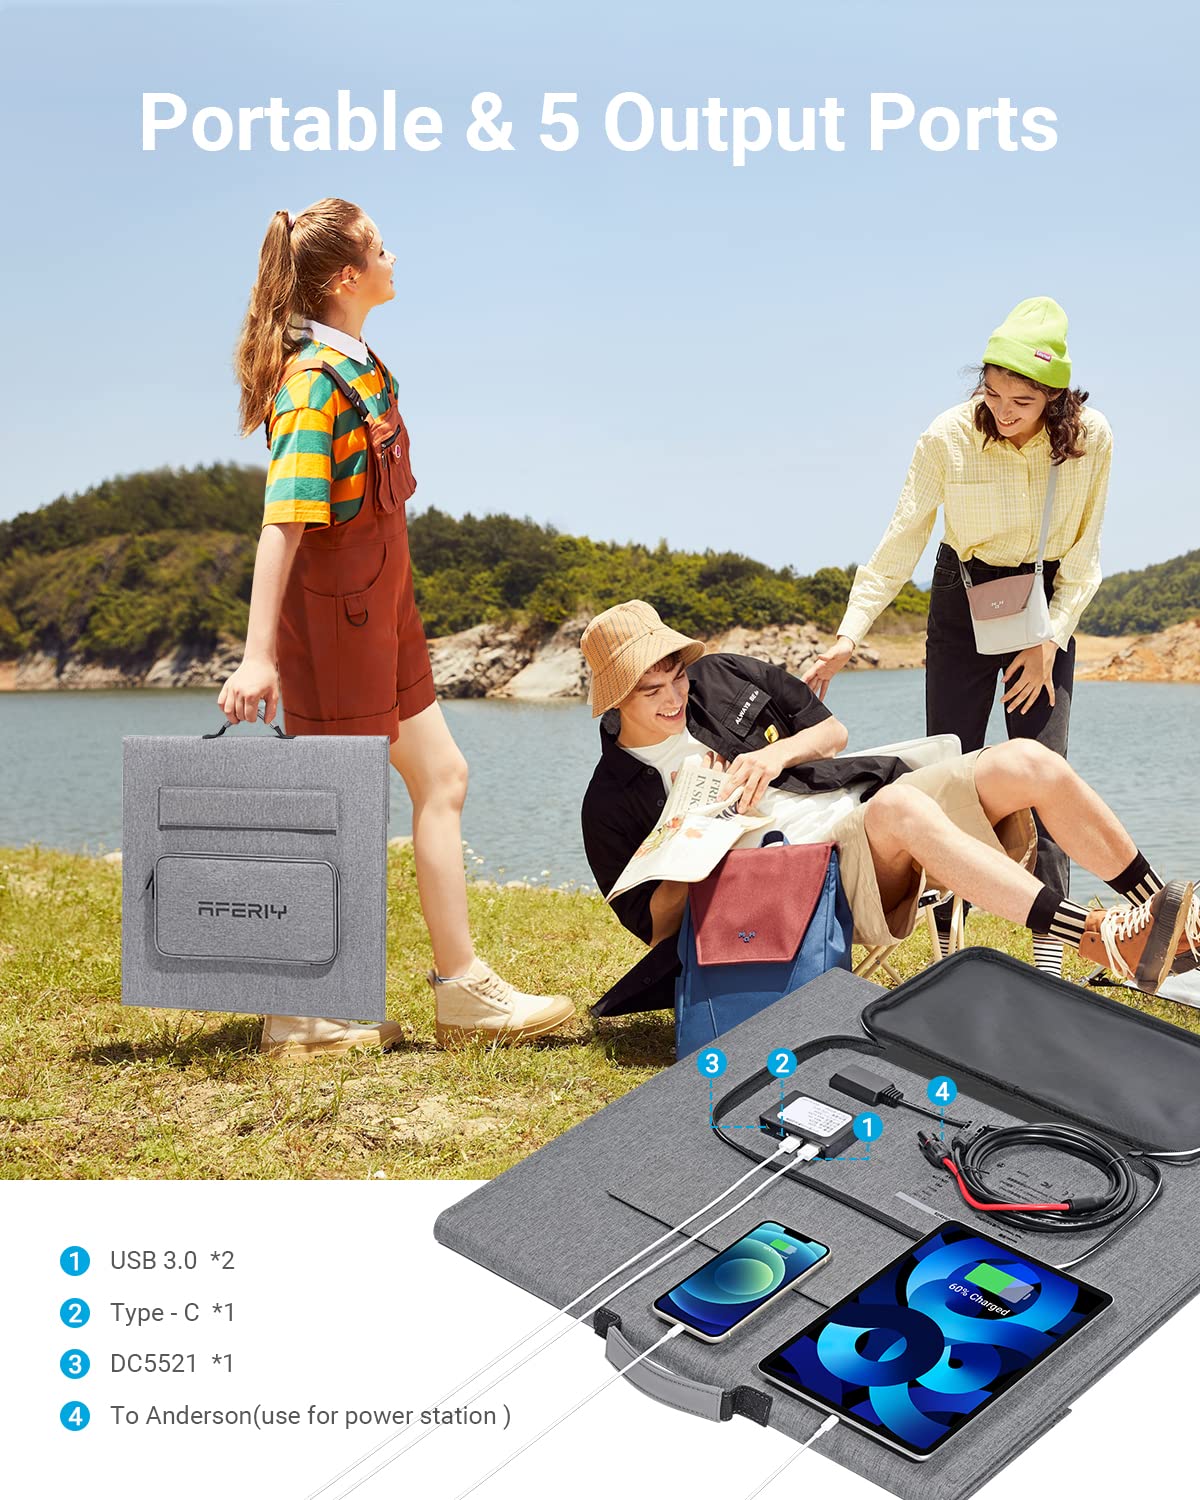 AFERIY ‎AF-S200 200W Portable Solar Panel  is portable & 5 output ports